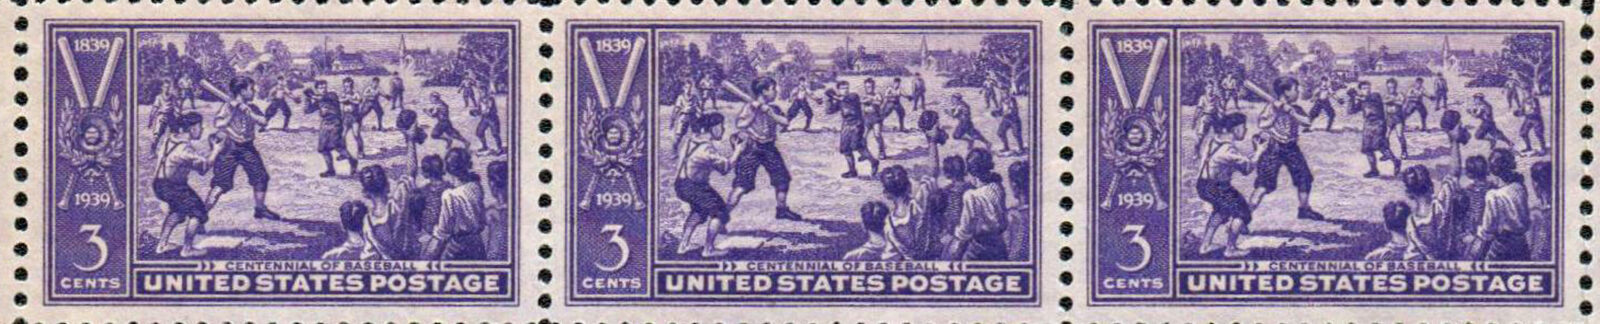 Centennial of Baseball, U.S. Postage Stamps